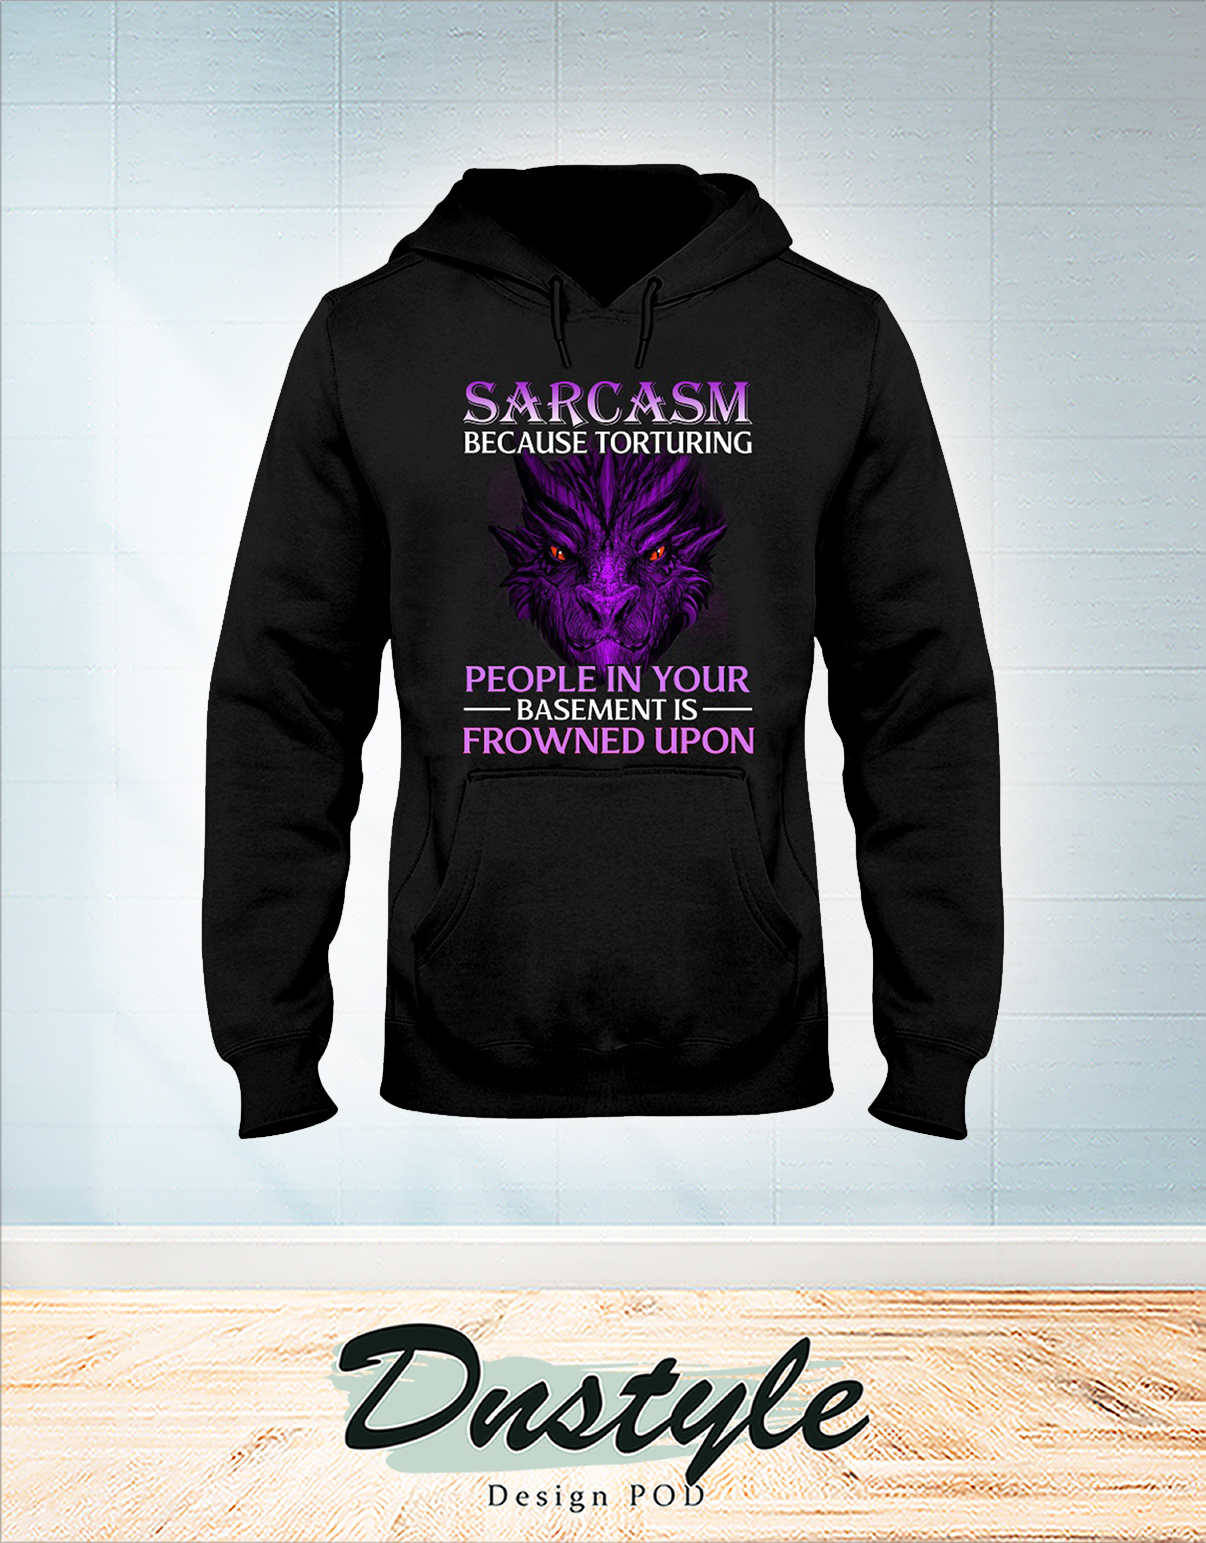 Sarcasm because torturing people in your basement hoodie